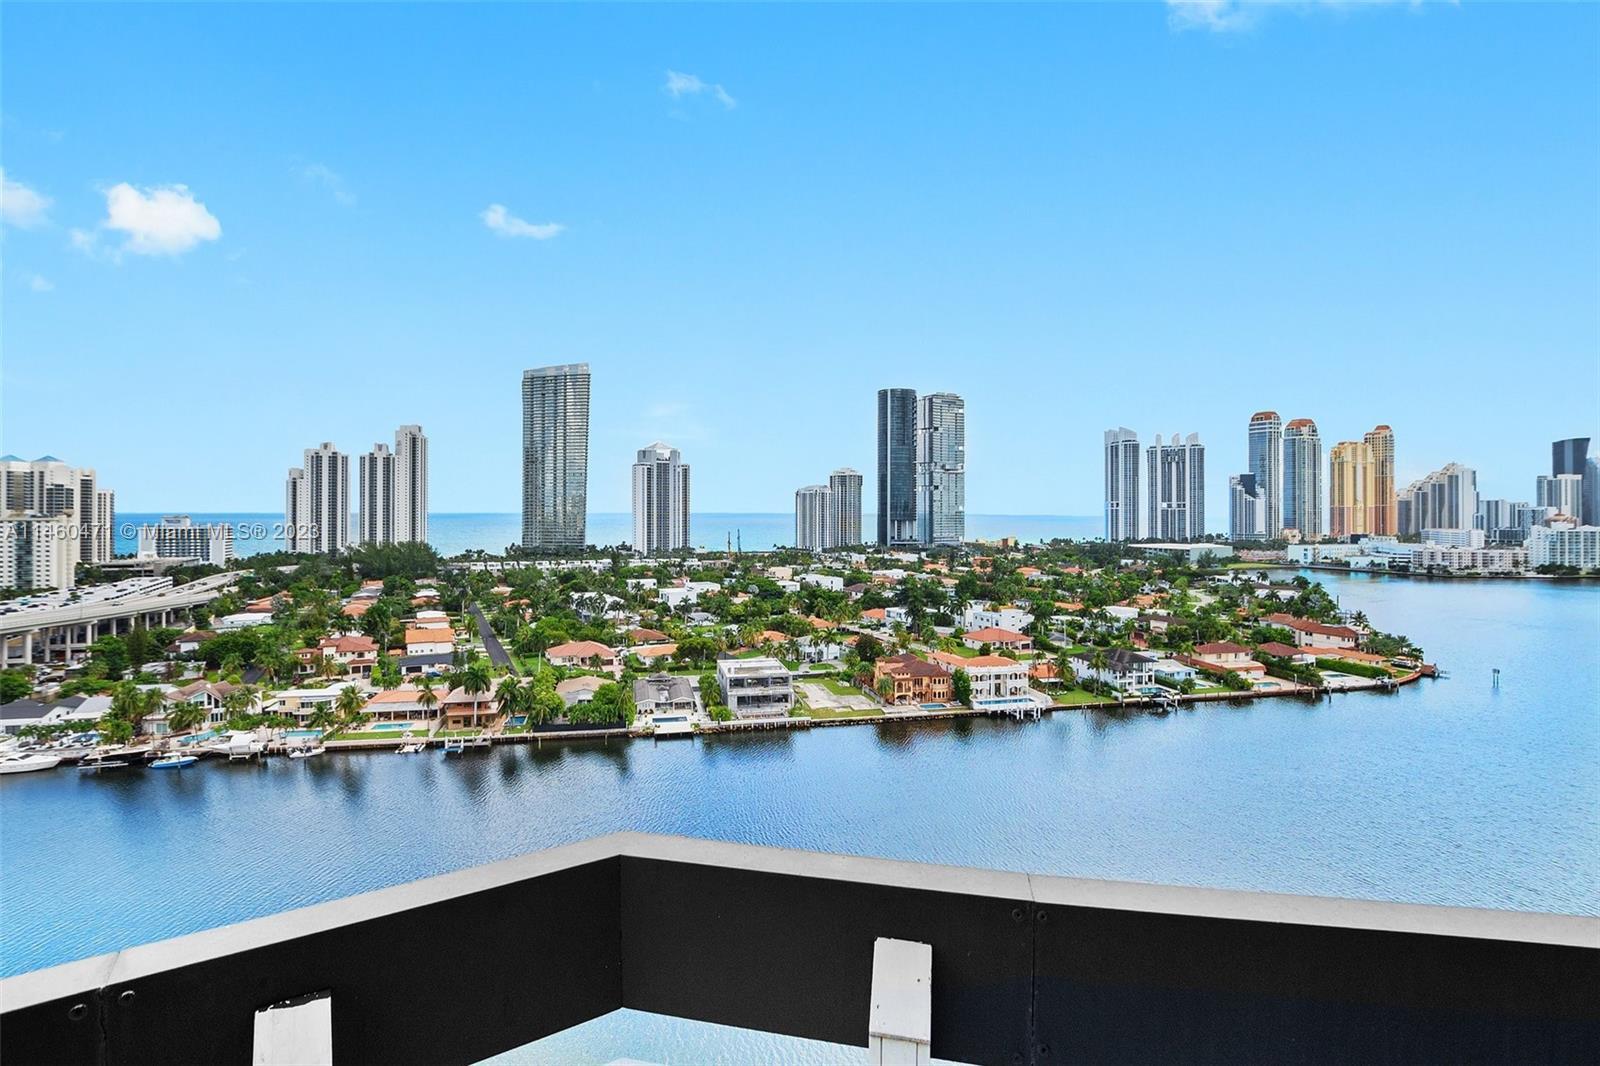 The best views in all of Mystic Pointe.  Offers views of both the Intracoastal Waterway and the ocea